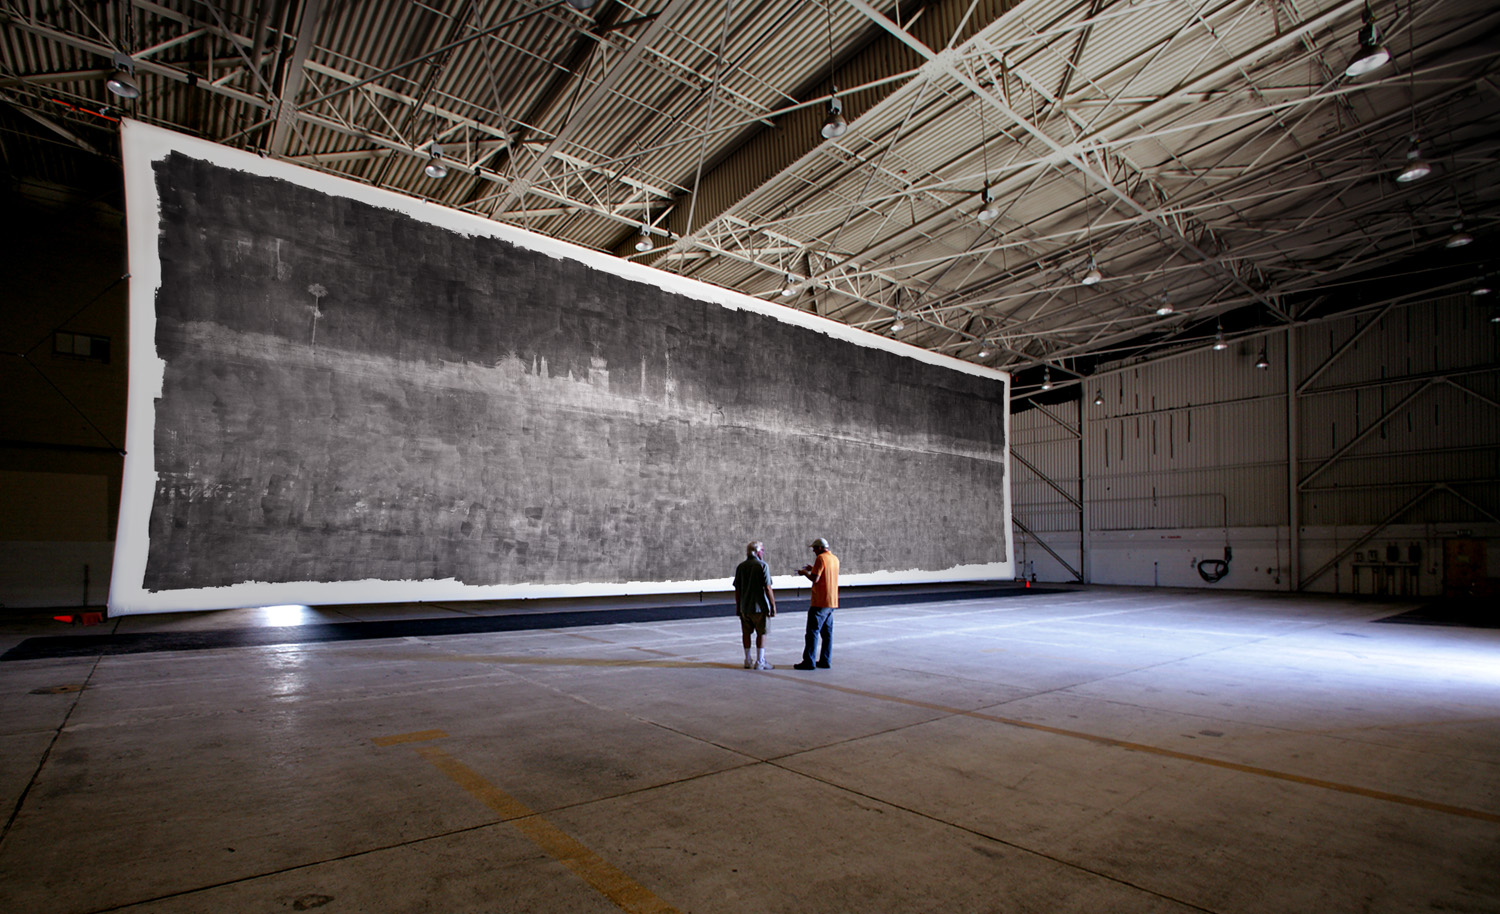 The world record photograph - 32 feet by 111 feet - in place in the closed F-18 jet hanger used as a camera to make the image.